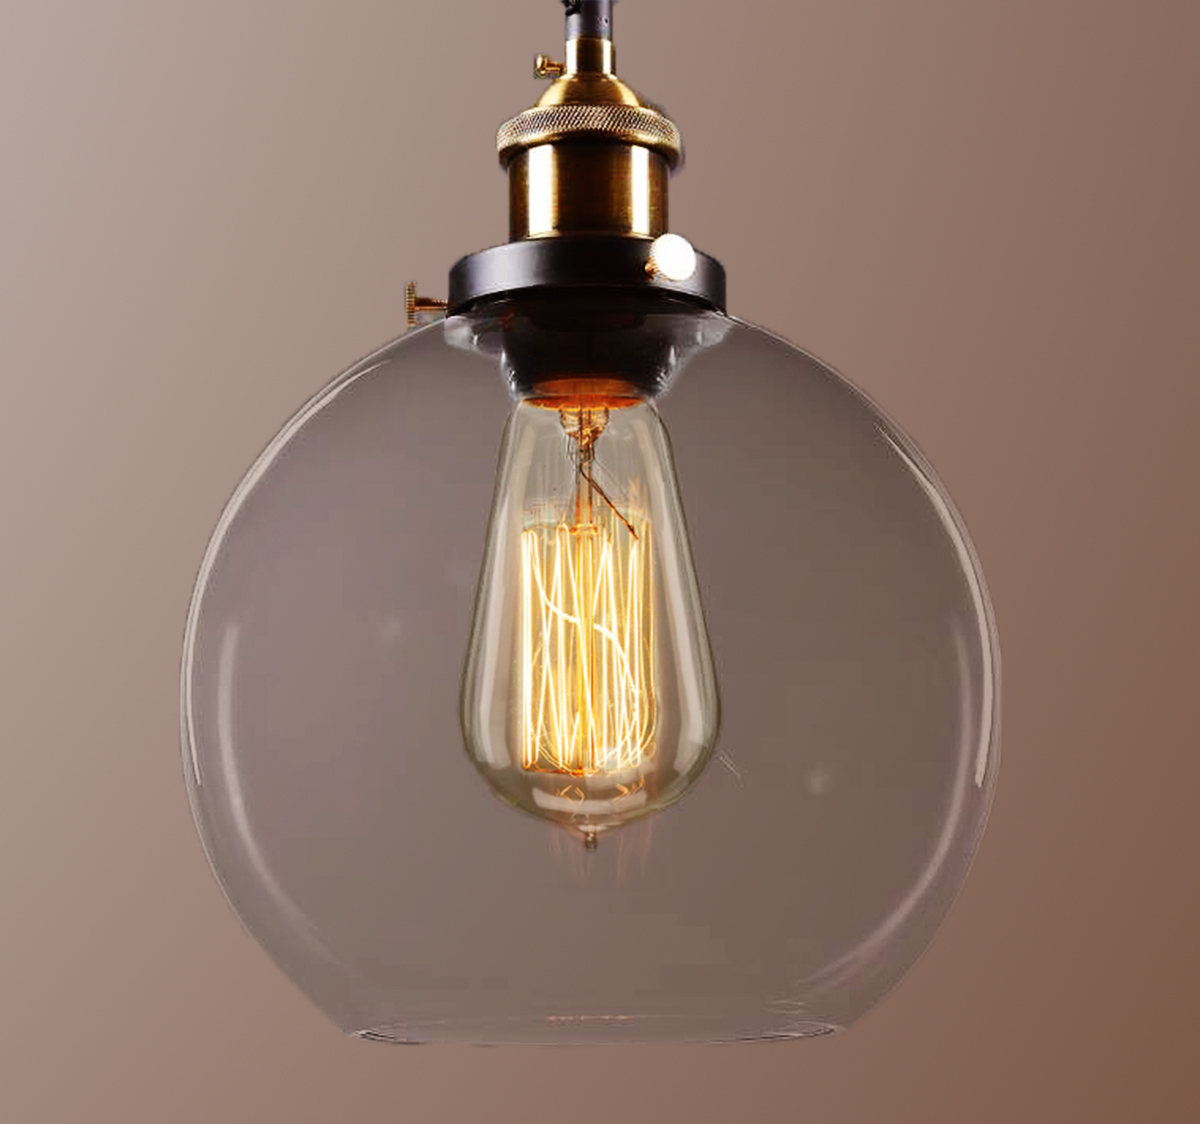 Carbon Loft Gertrude 8-inch Adjustable Height Pendant with Bulb